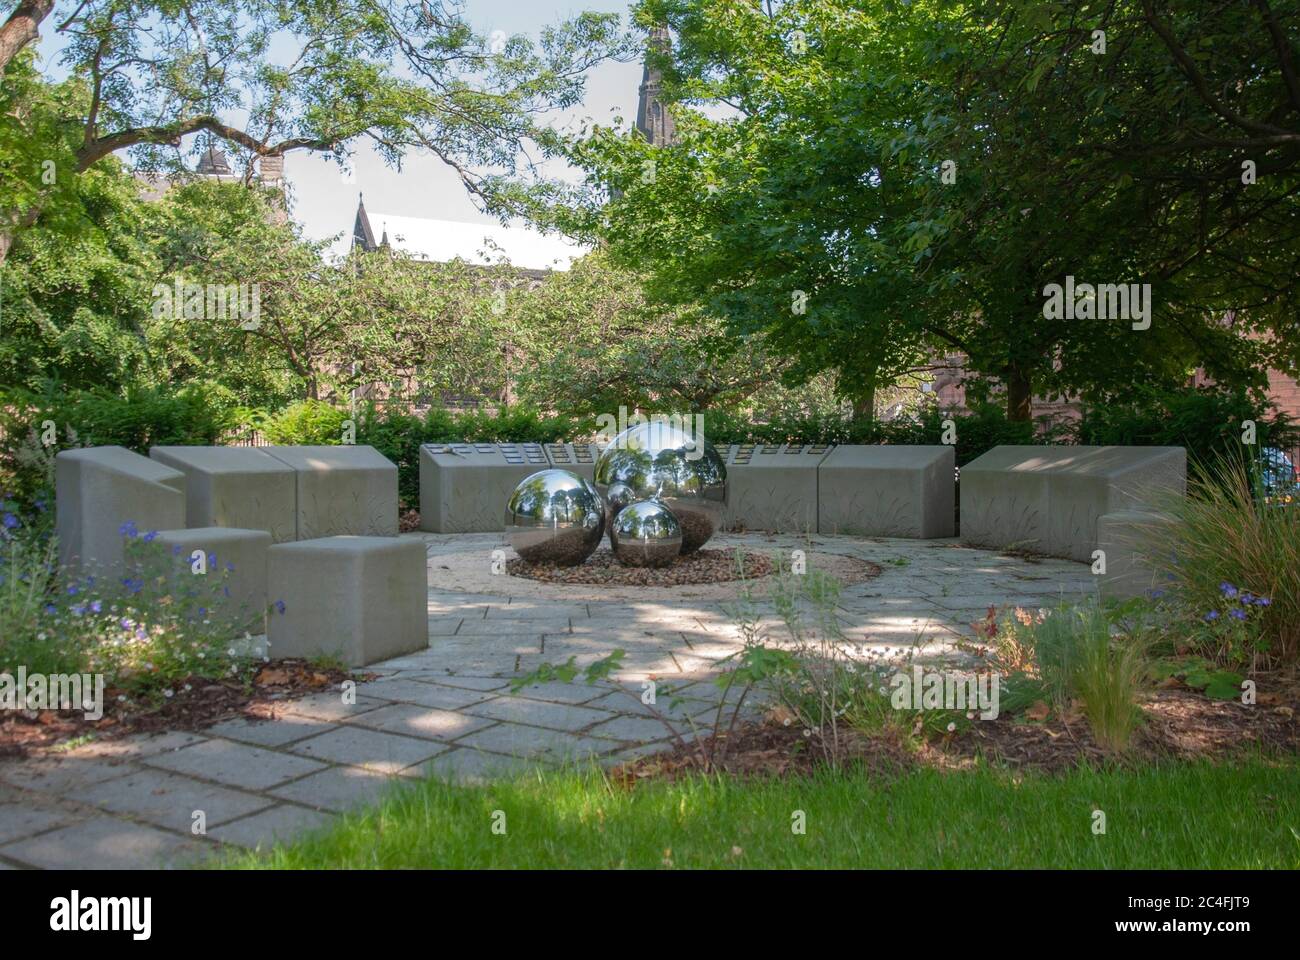 City of Glasgow Council Infant Ashes Memorial Garden three 3 chrome stainless steel spheres surrounded by circles etched carved stone blocks National Stock Photo